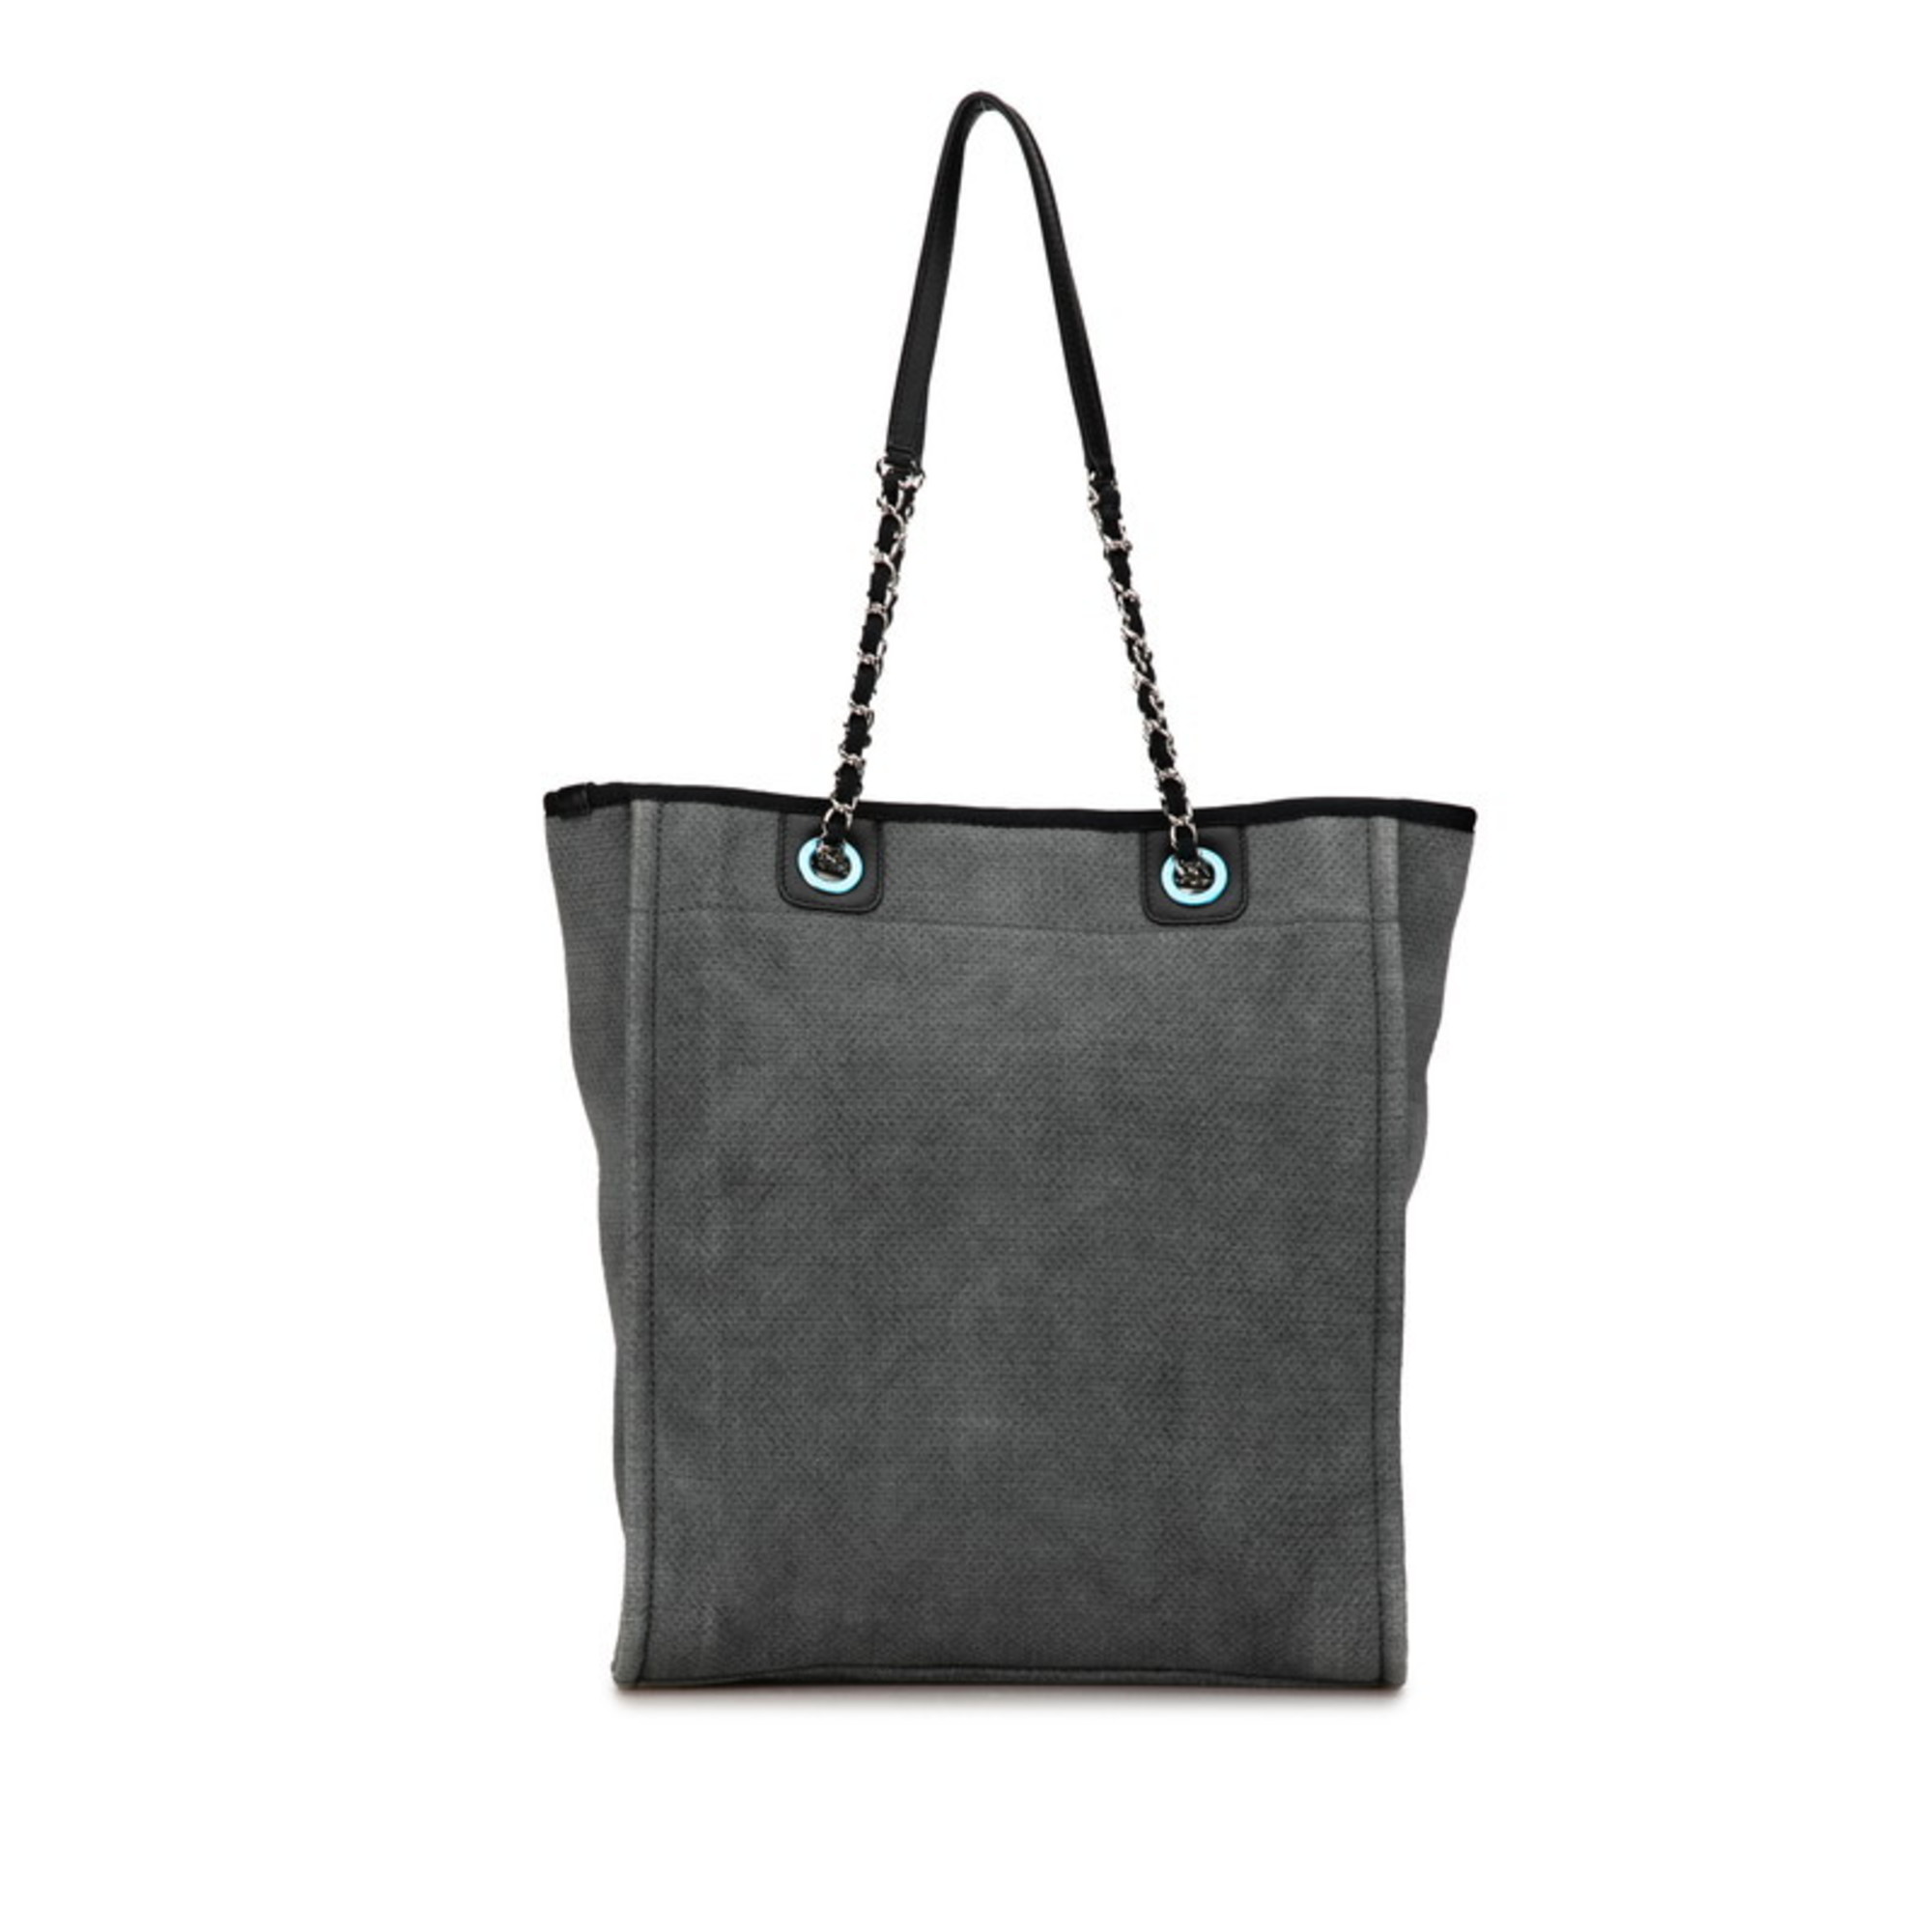 Chanel Deauville PM Tote Bag A66939 Grey Black Canvas Leather Women's CHANEL